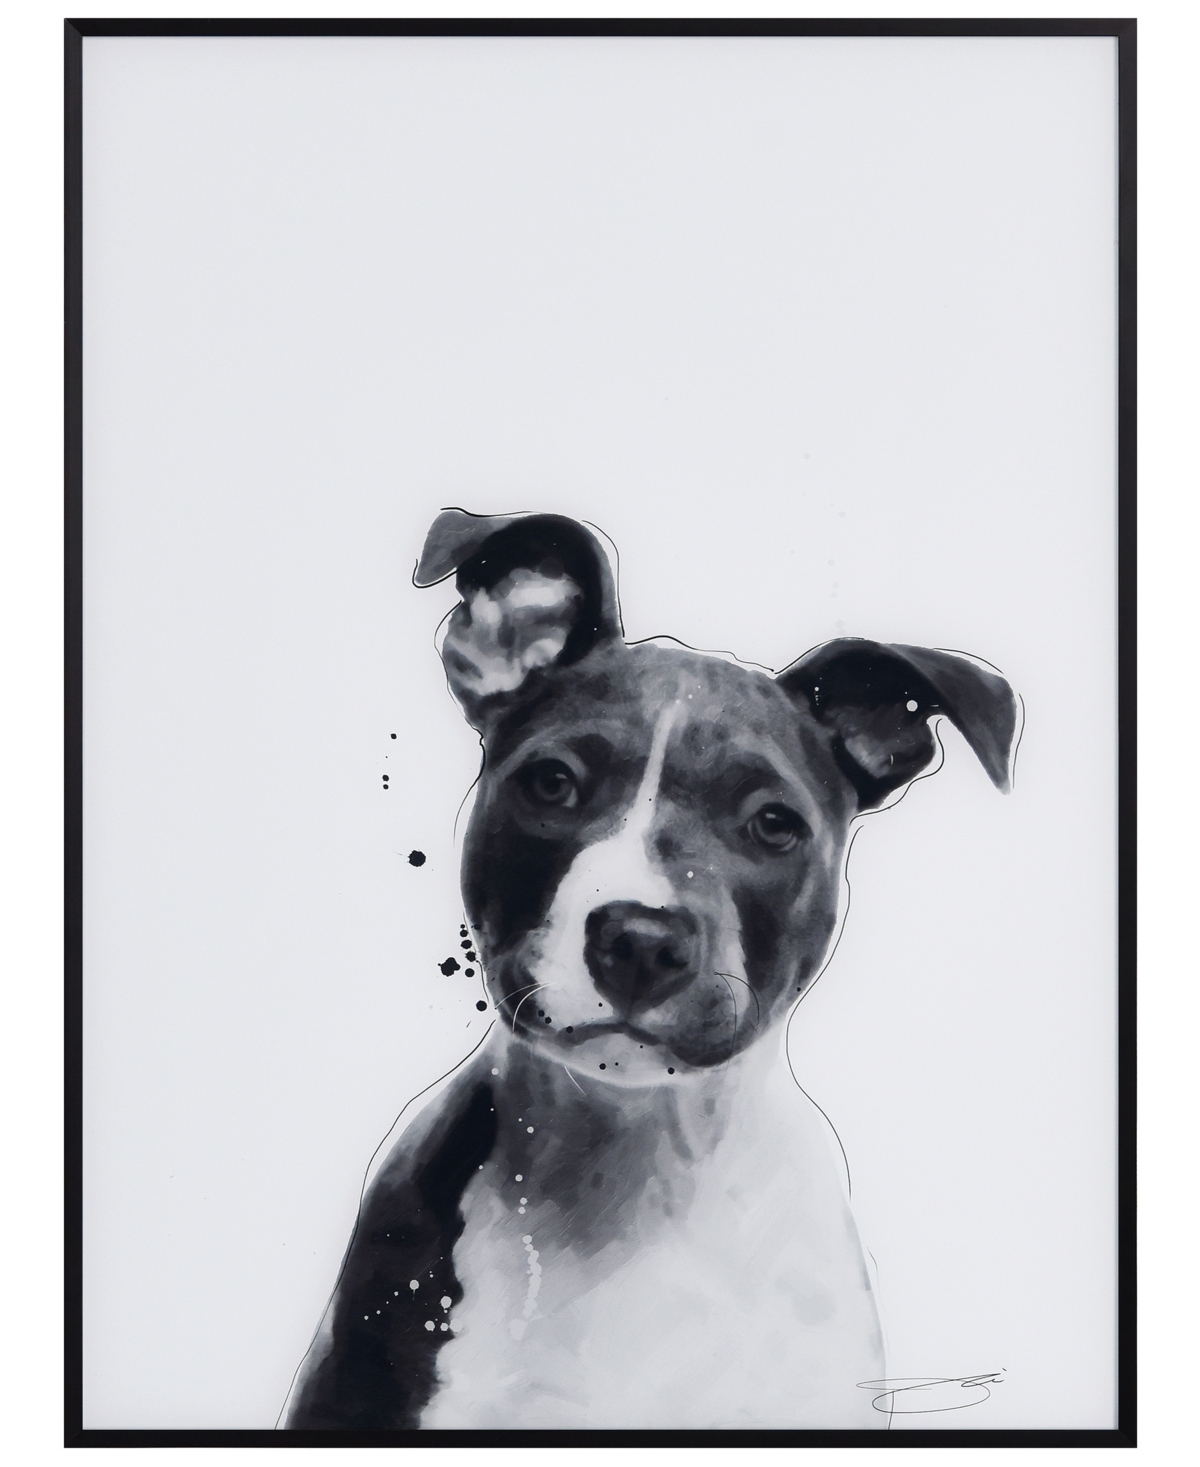 Empire Art Direct "pitbull" Pet Paintings On Printed Glass Encased With A Black Anodized Frame, 24" X 18" X 1" In Black And White